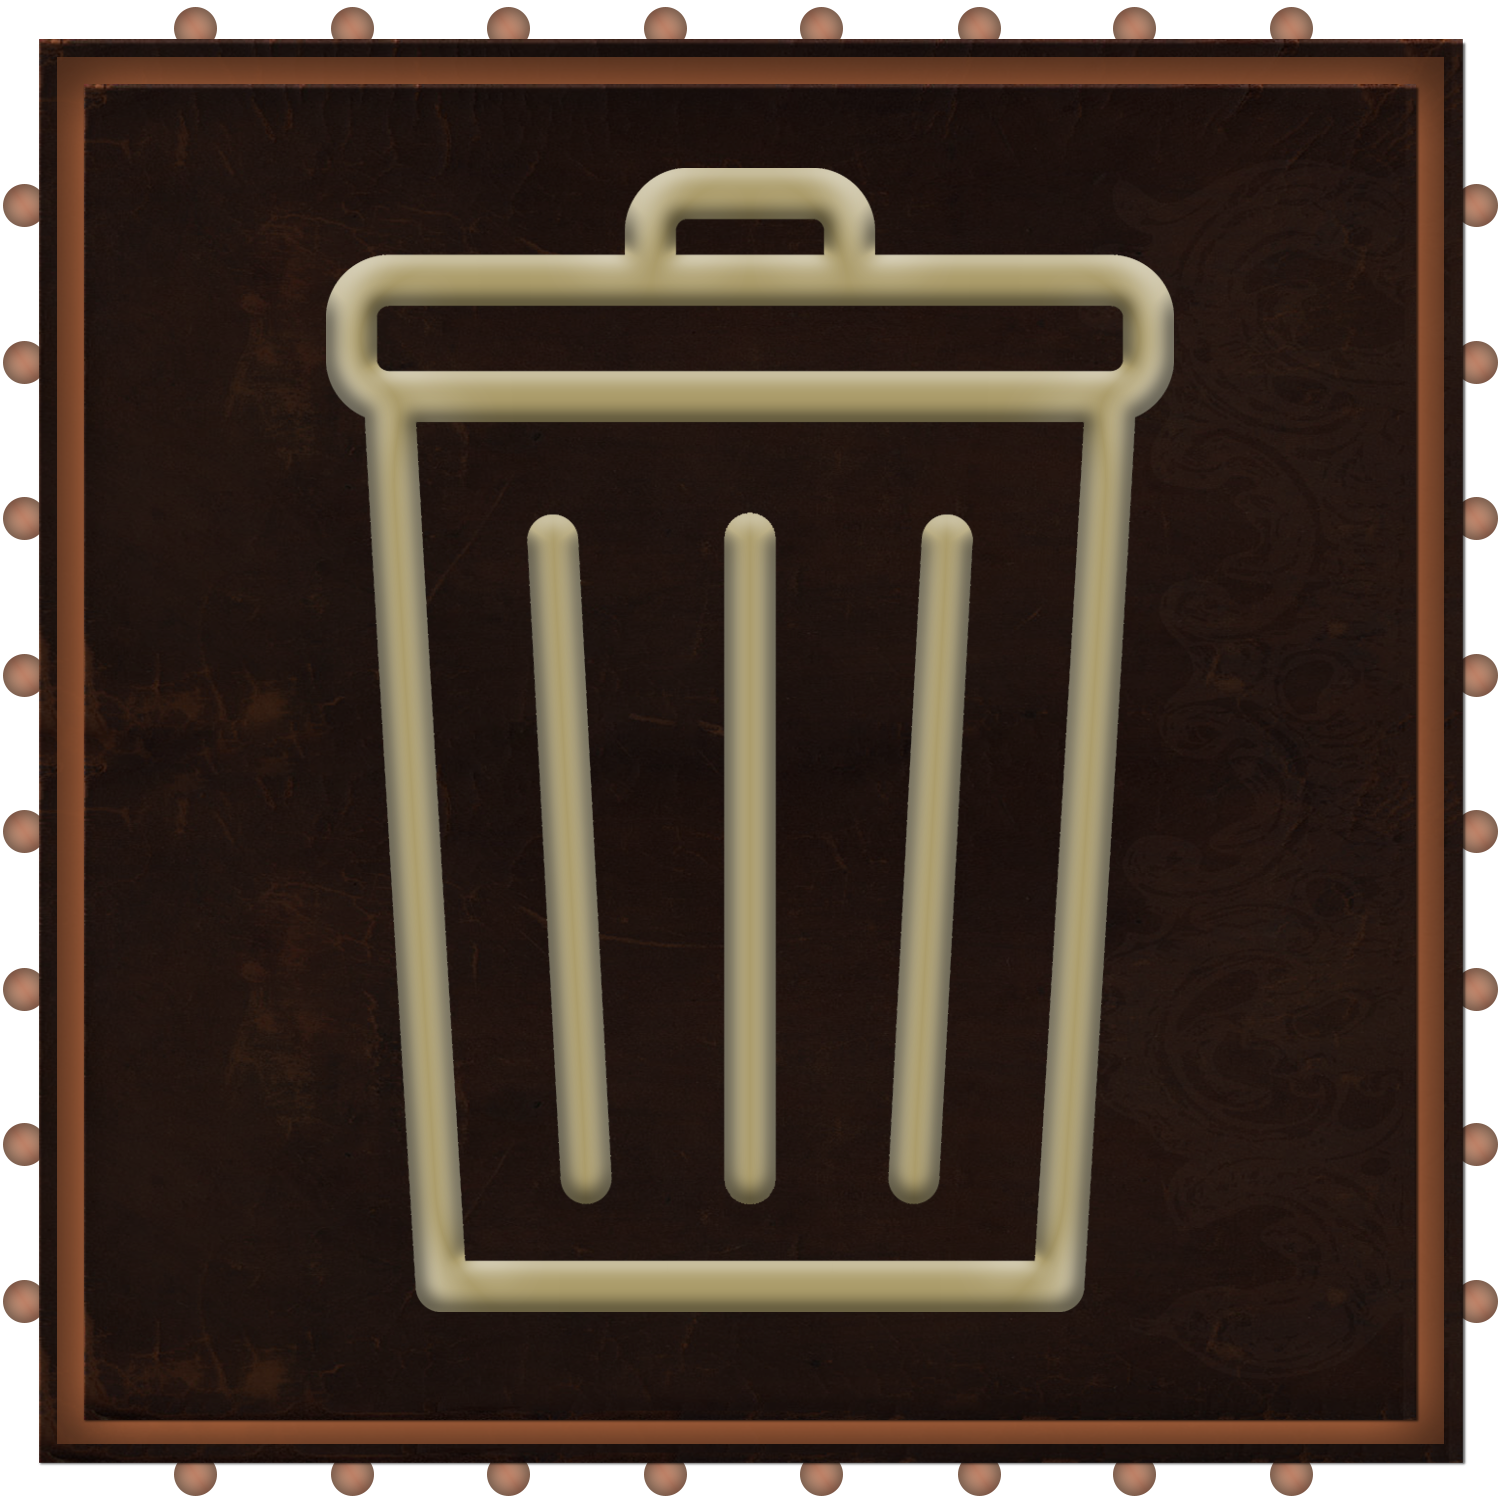 solid waste icon